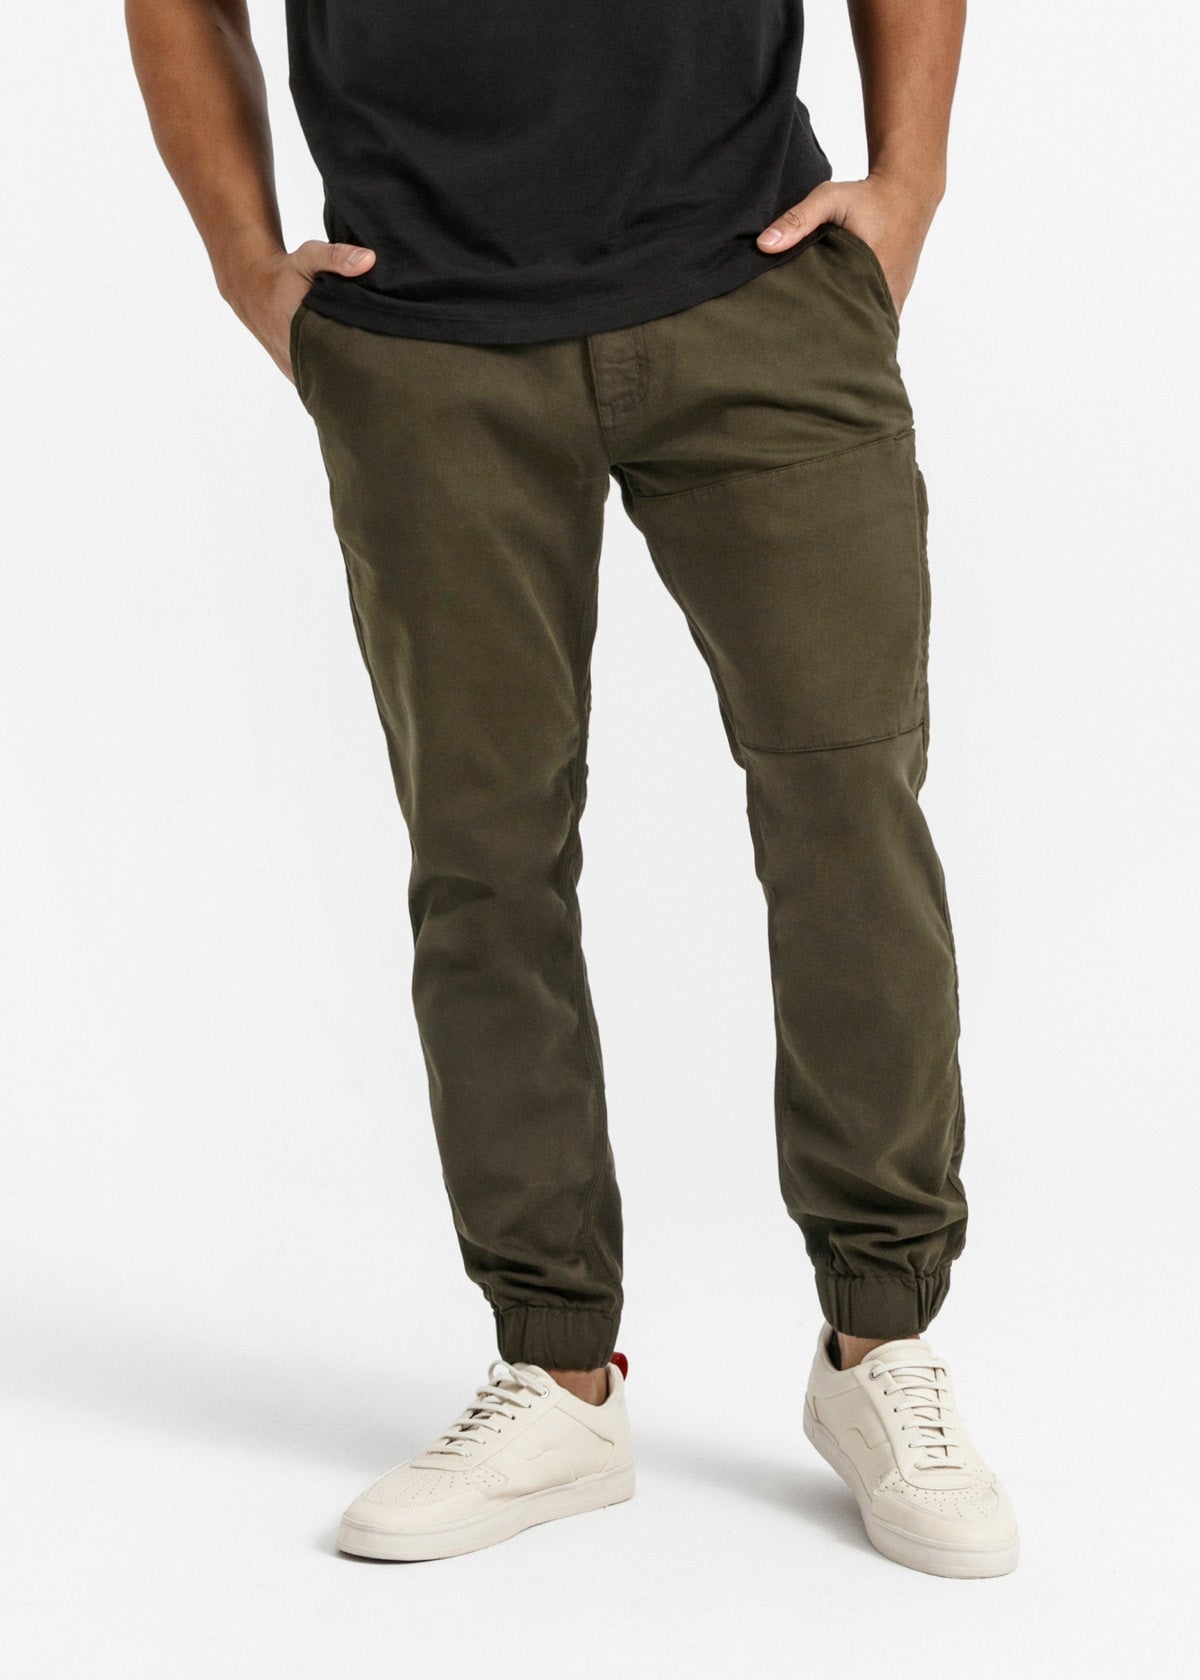 Men's Relaxed Fit Jeans & Pants – Tagged 